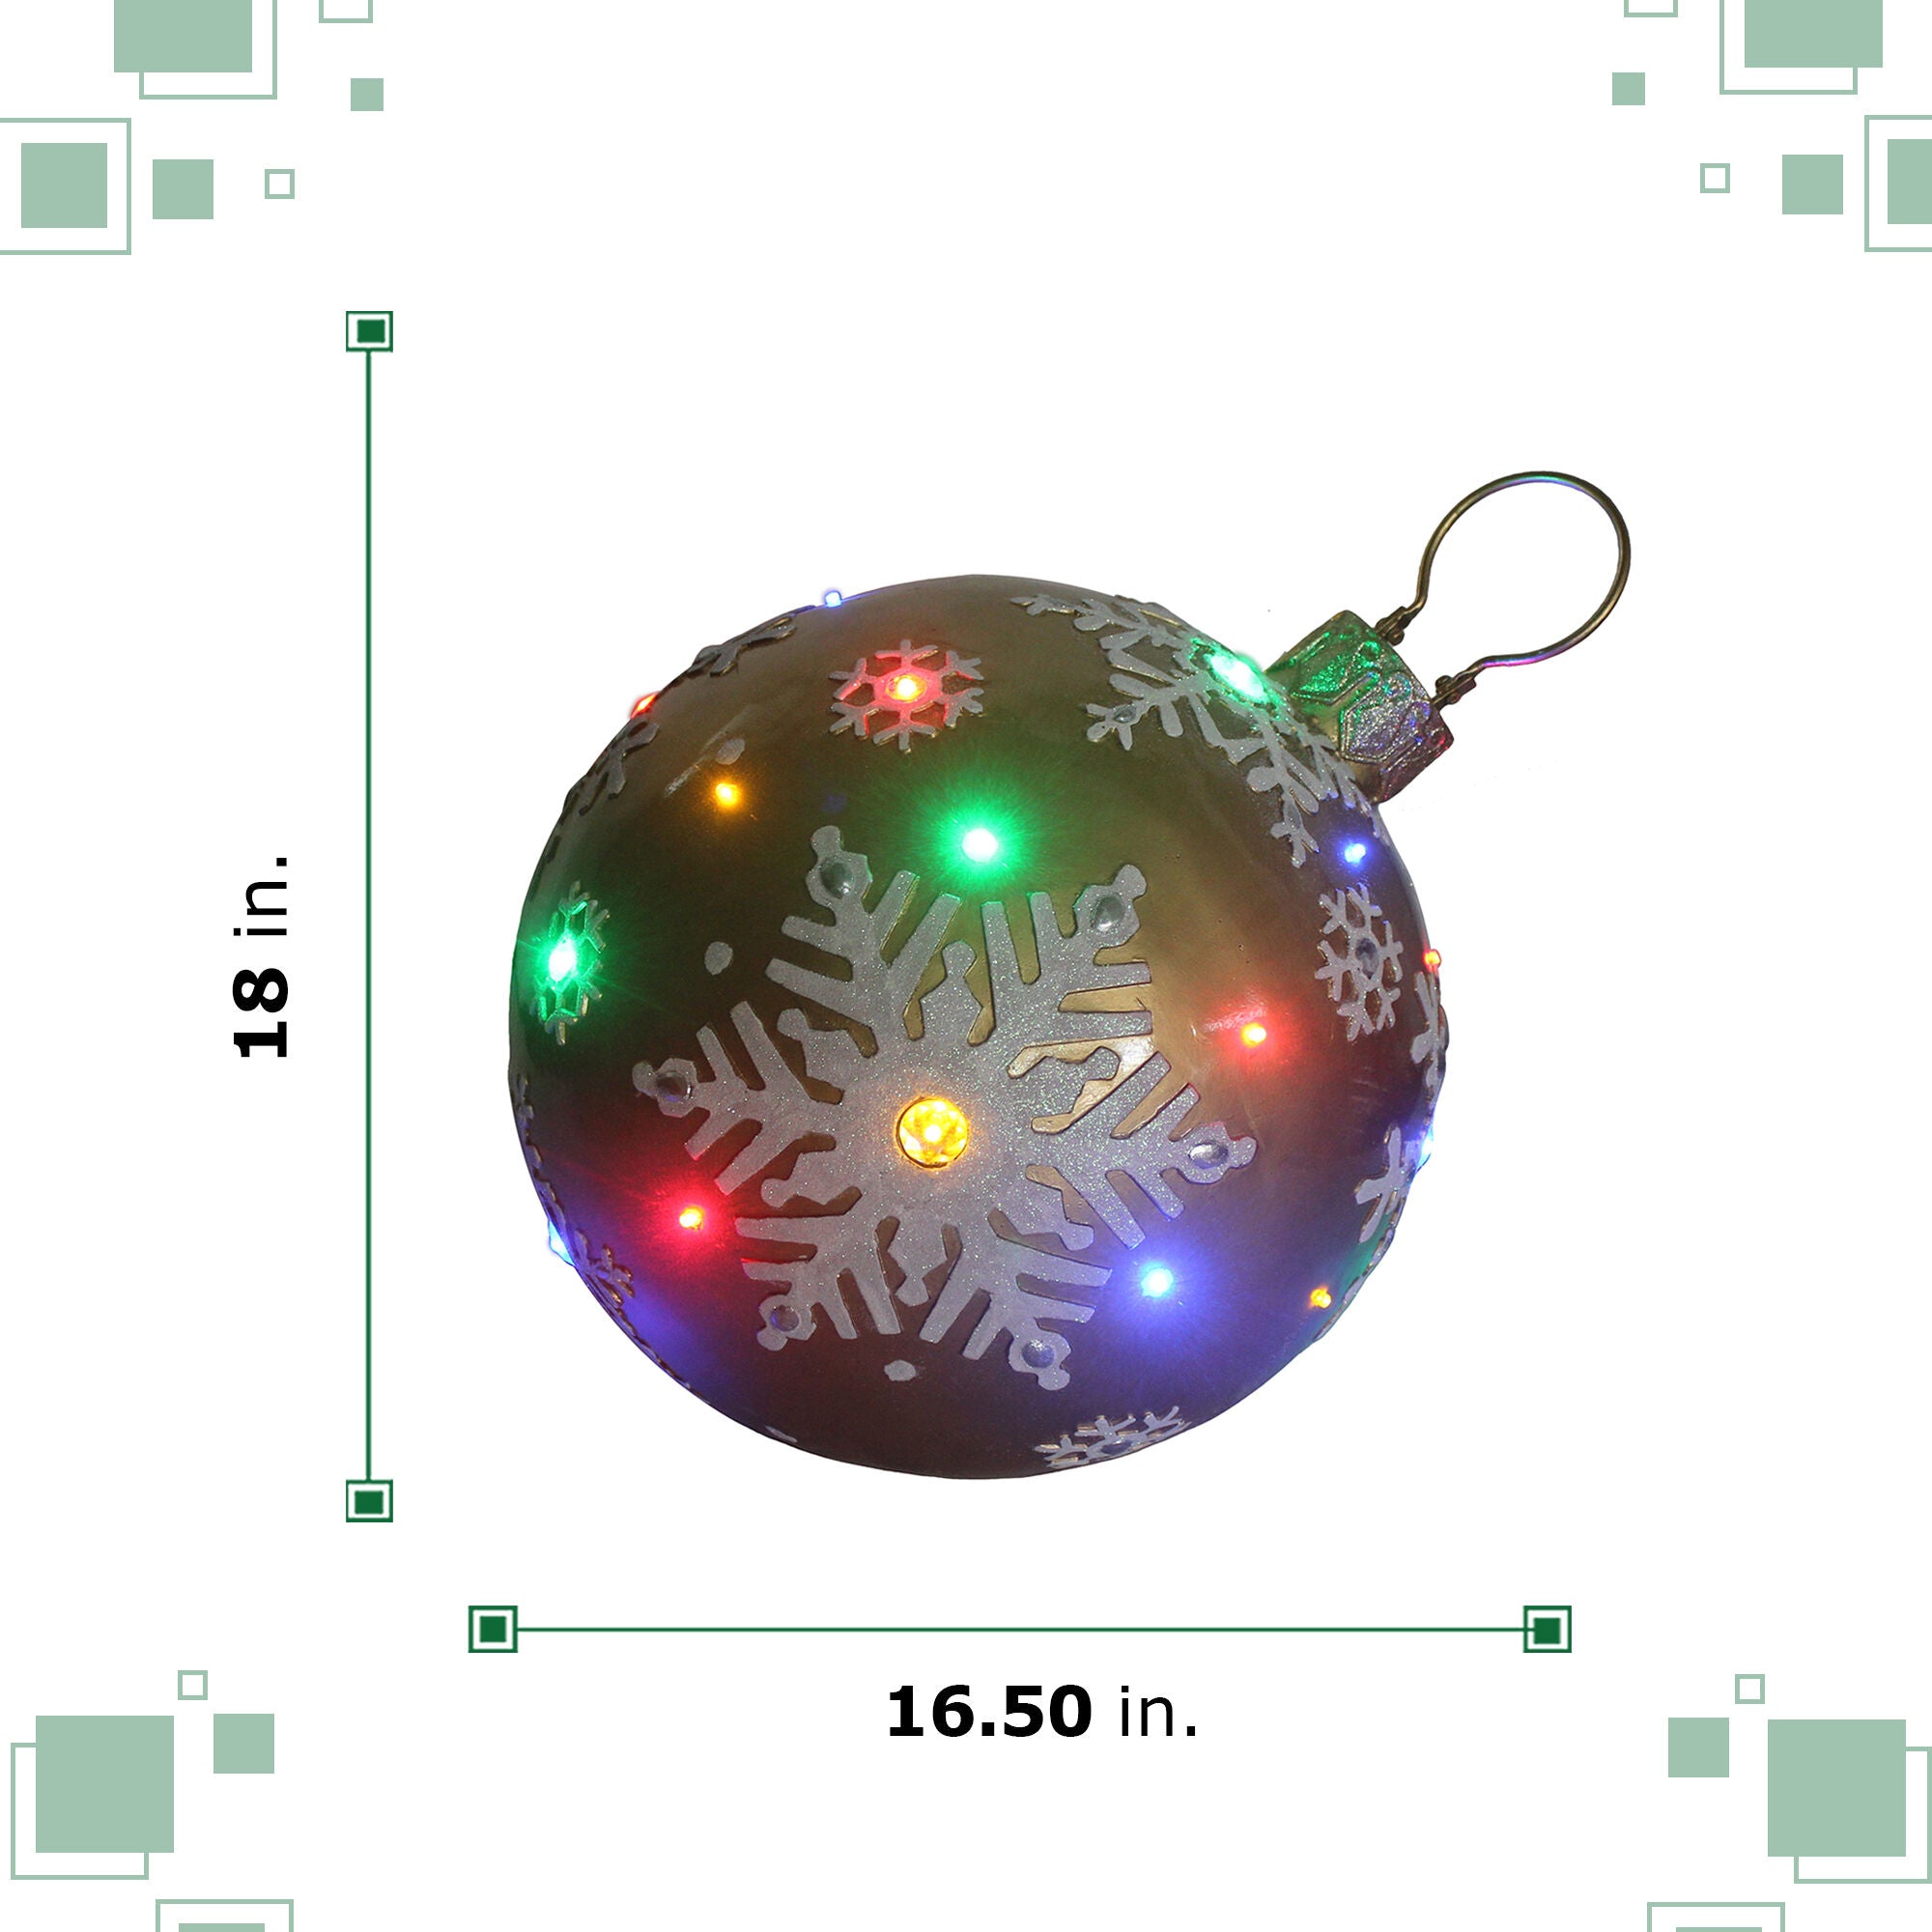 Fraser Hill Farm -  Indoor/Outdoor Oversized Christmas Decor w/ Long-Lasting LED Lights, 18-In. Jeweled Ball Ornament w/Snowflake Design in Gold